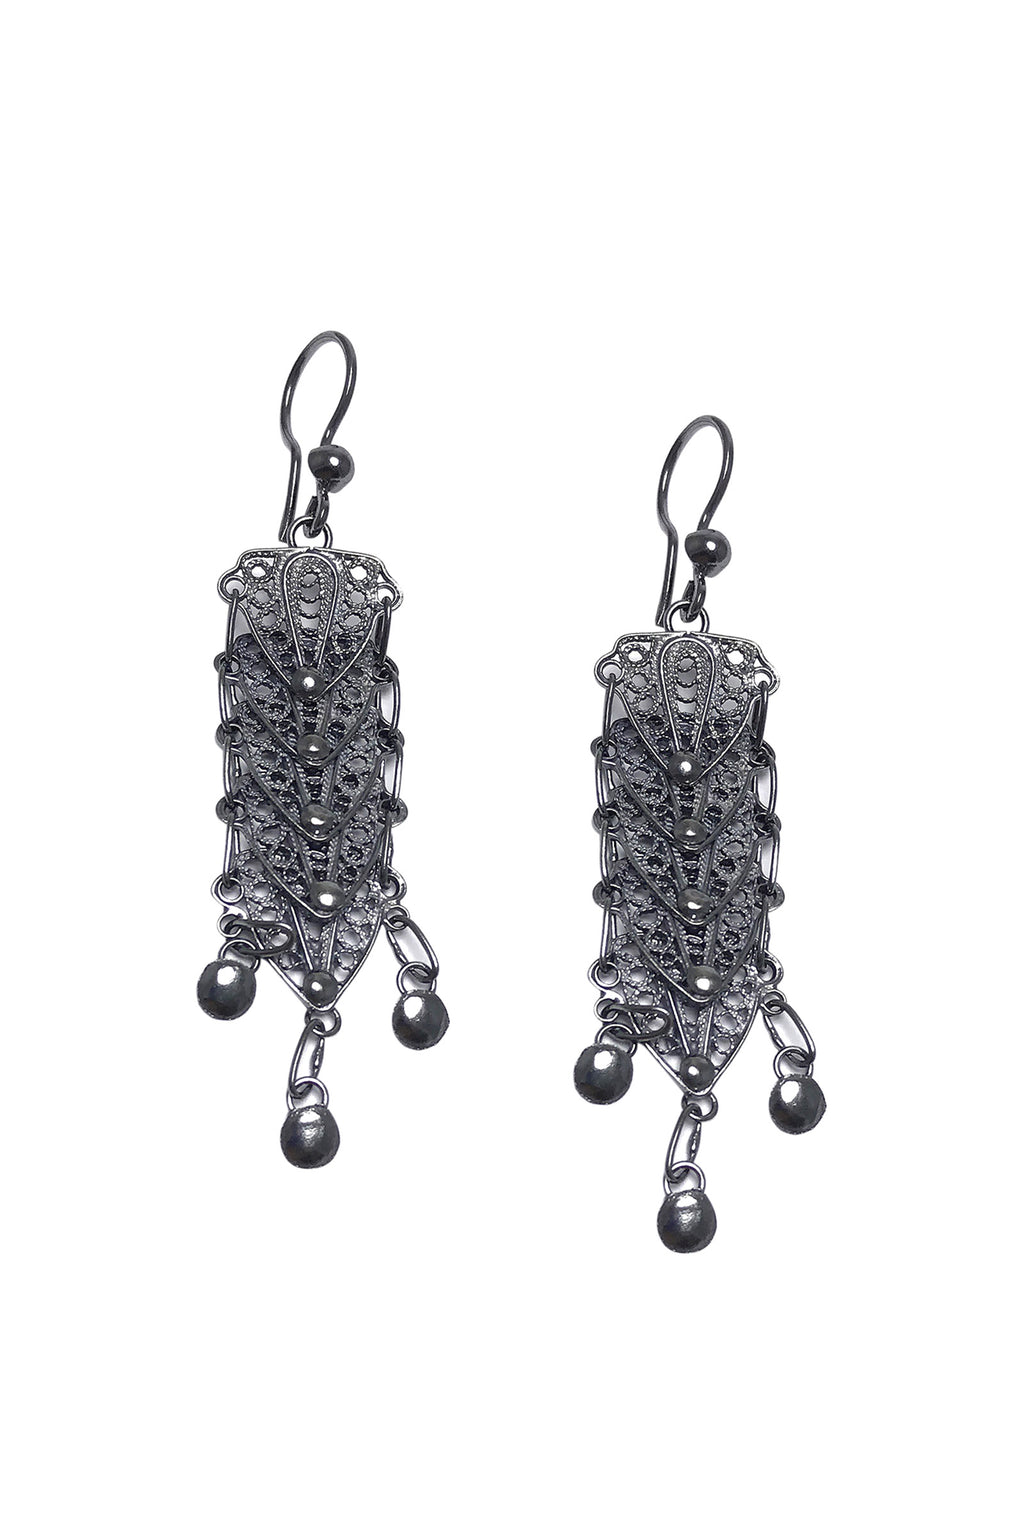 Scaly Heart Model Oxidized Filigree Silver Earrings (NG201017325)